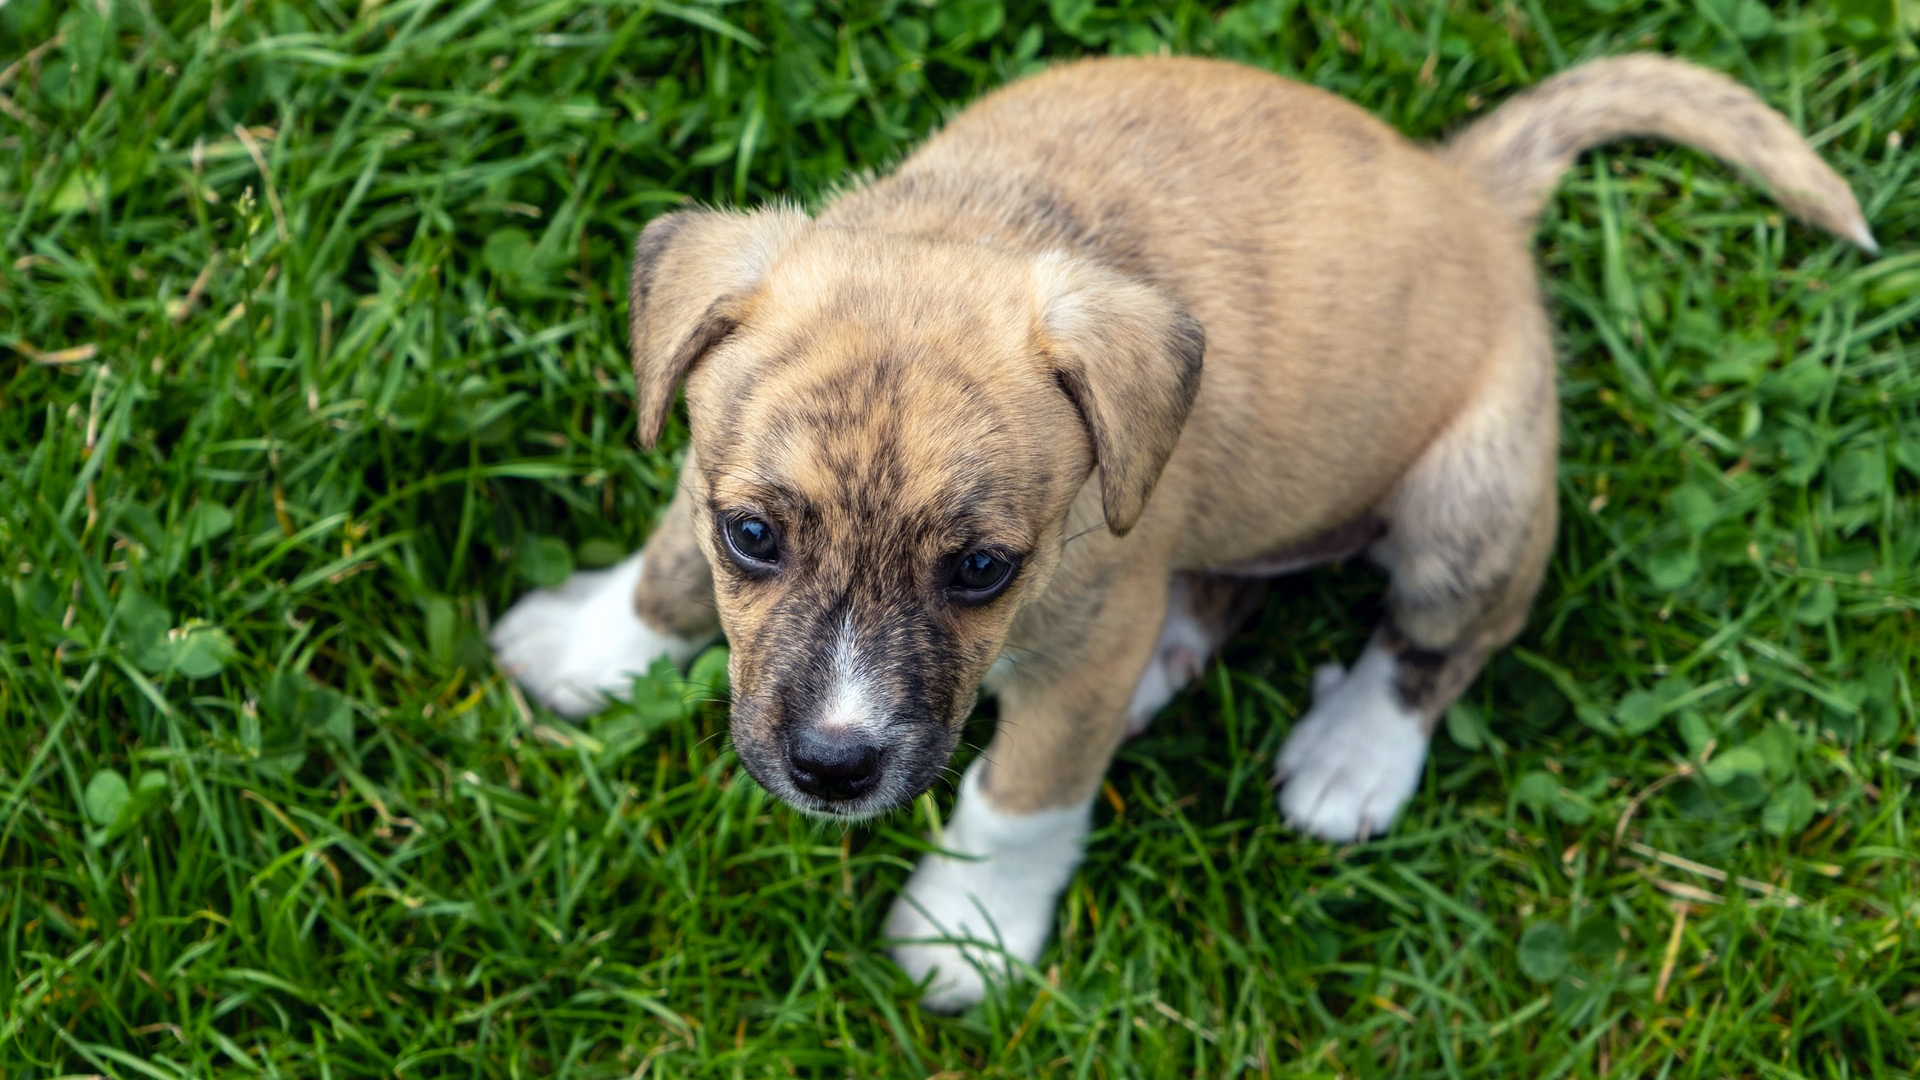 White And Brown Short Coated Small Puppy On Green Grass Field During Daytime 2K Animals